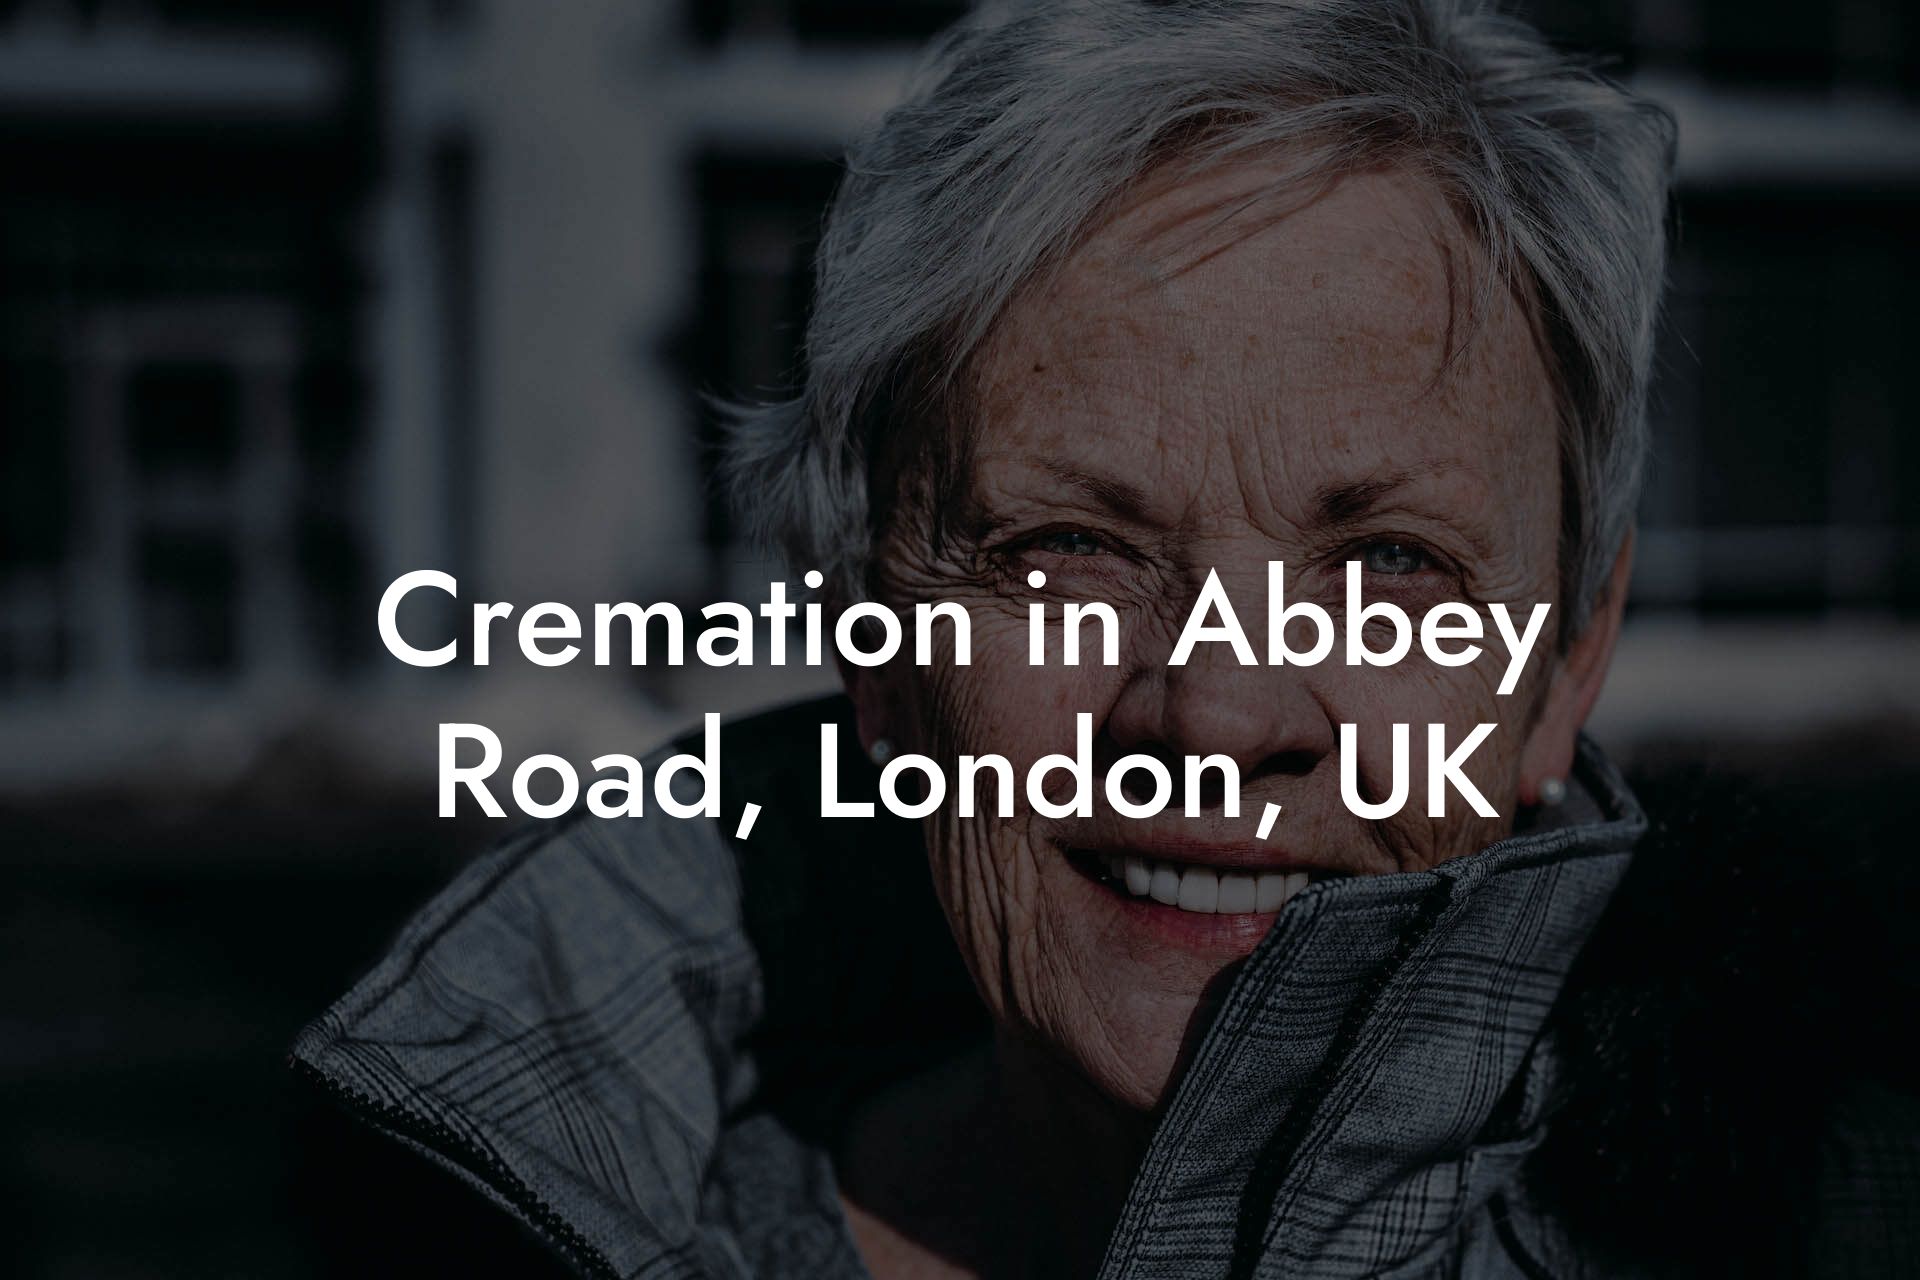 Cremation in Abbey Road, London, UK